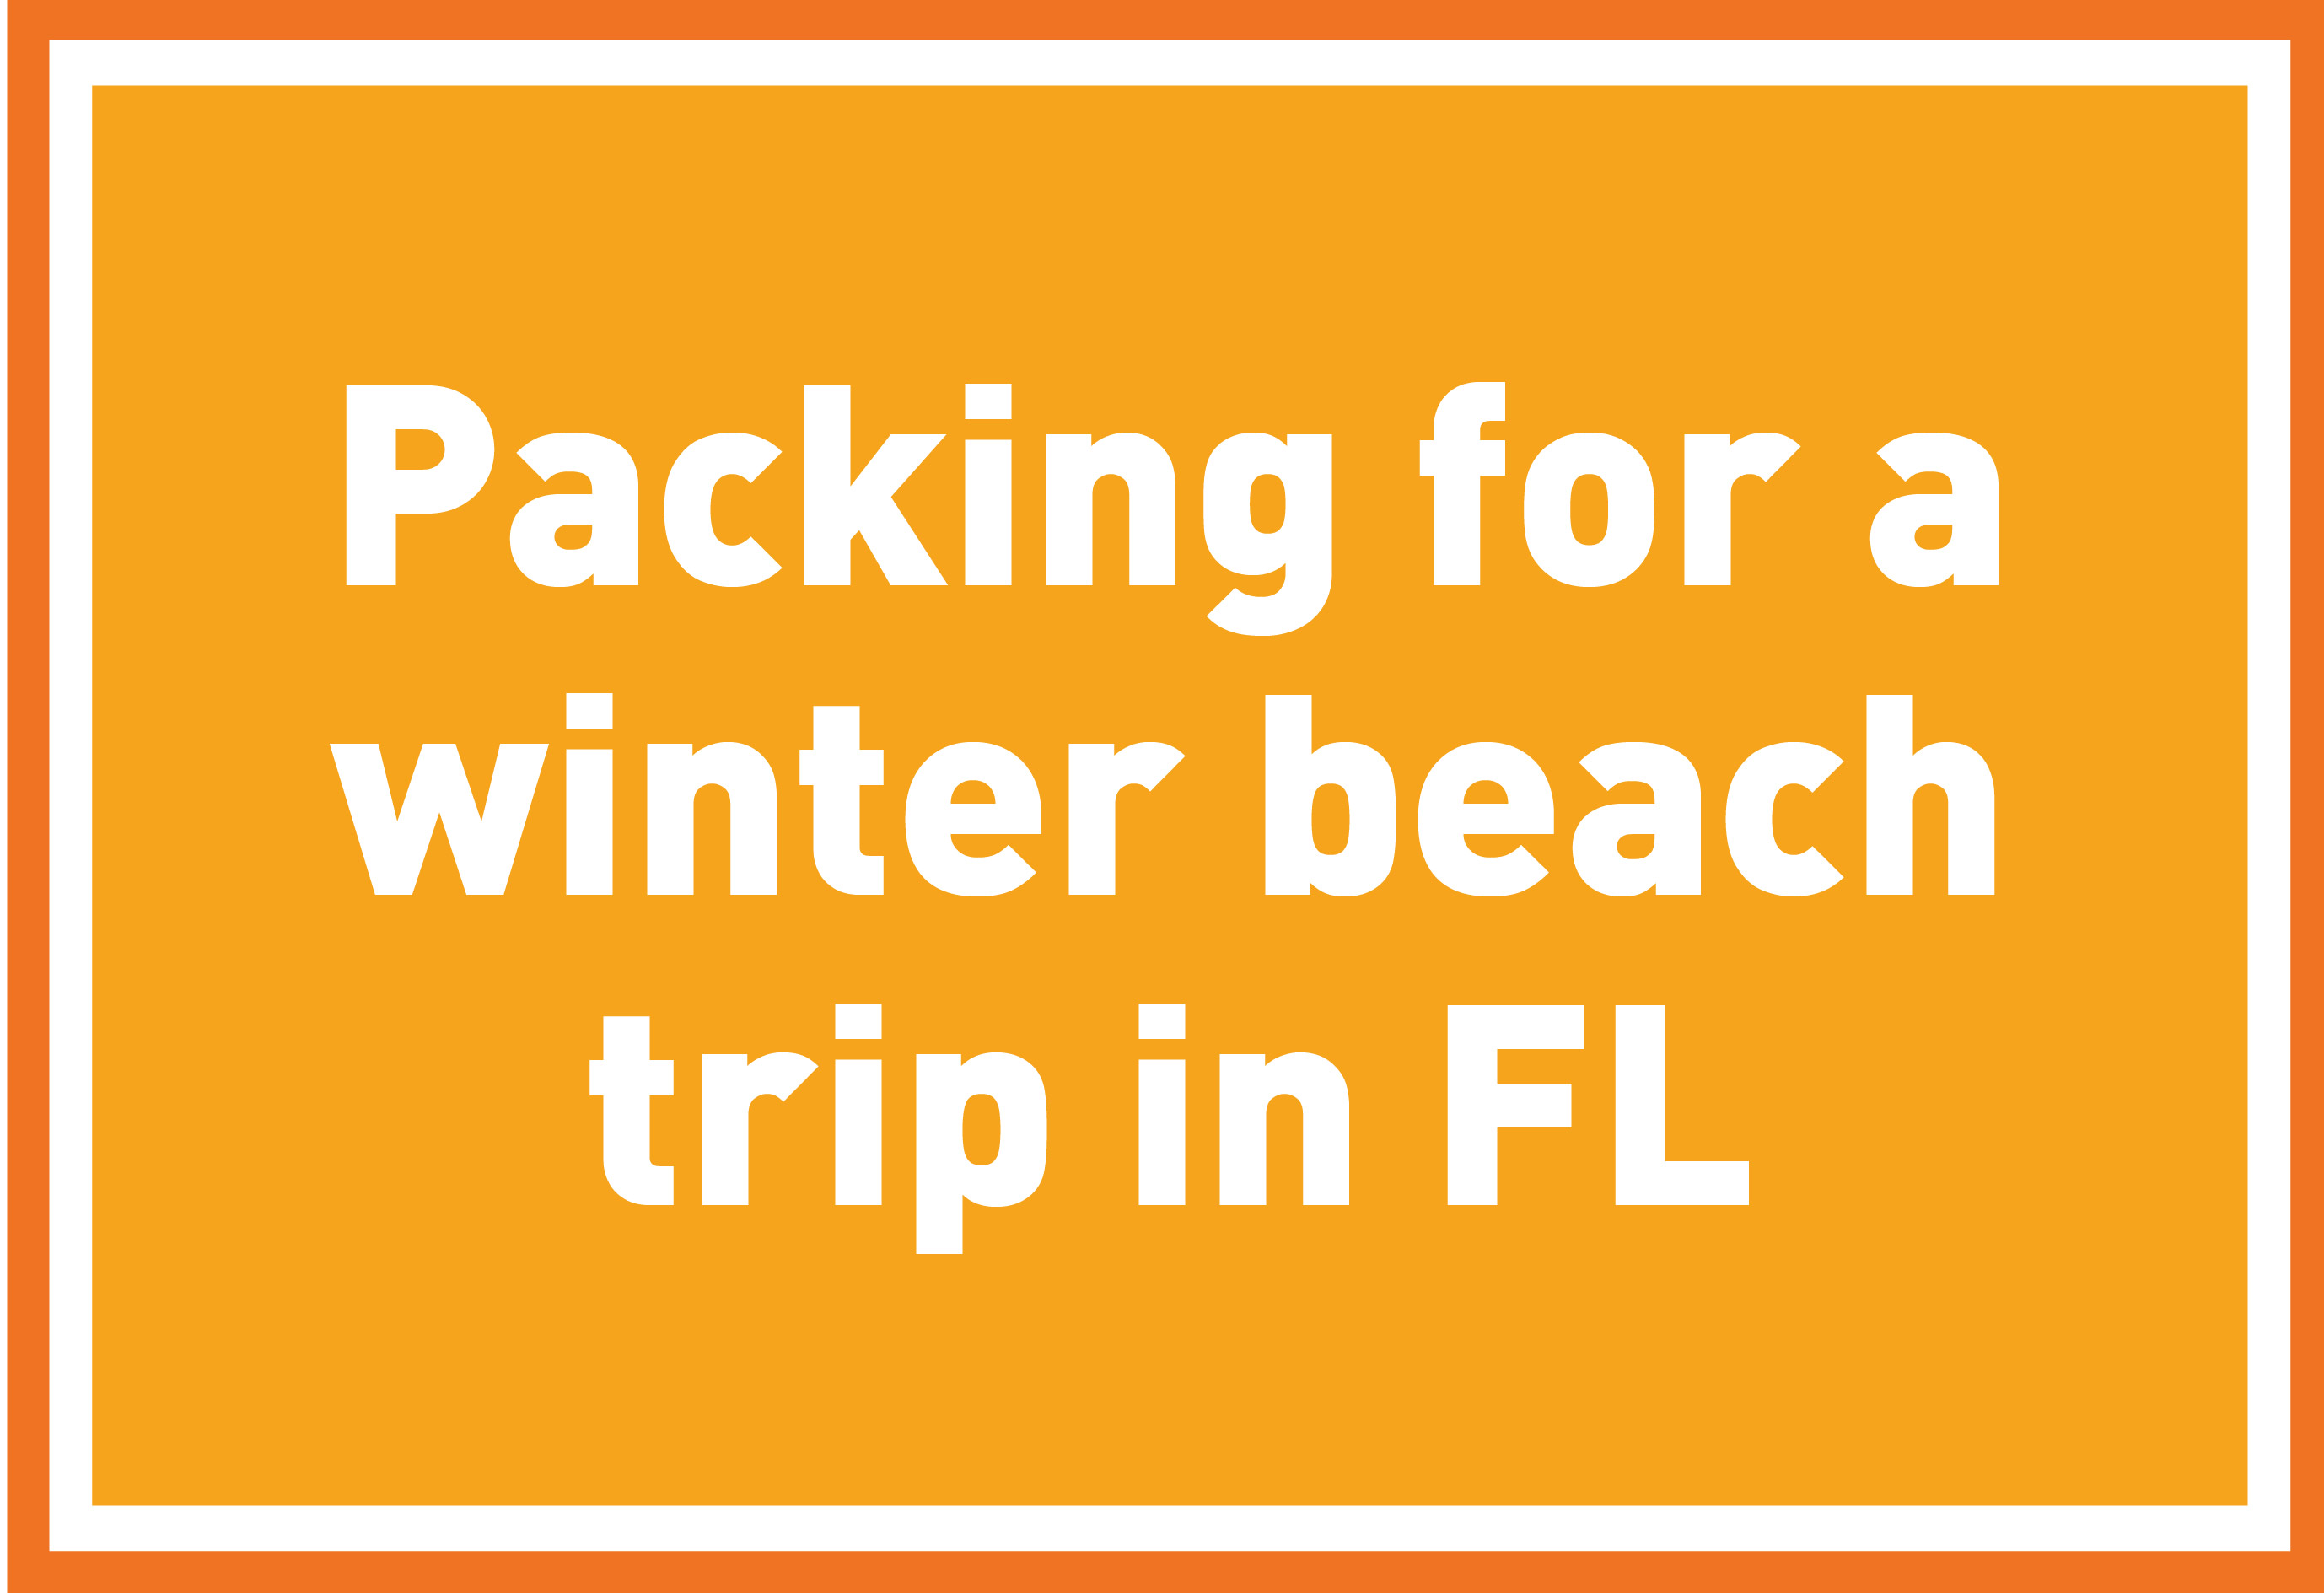 Packing for a winter beach trip in FL